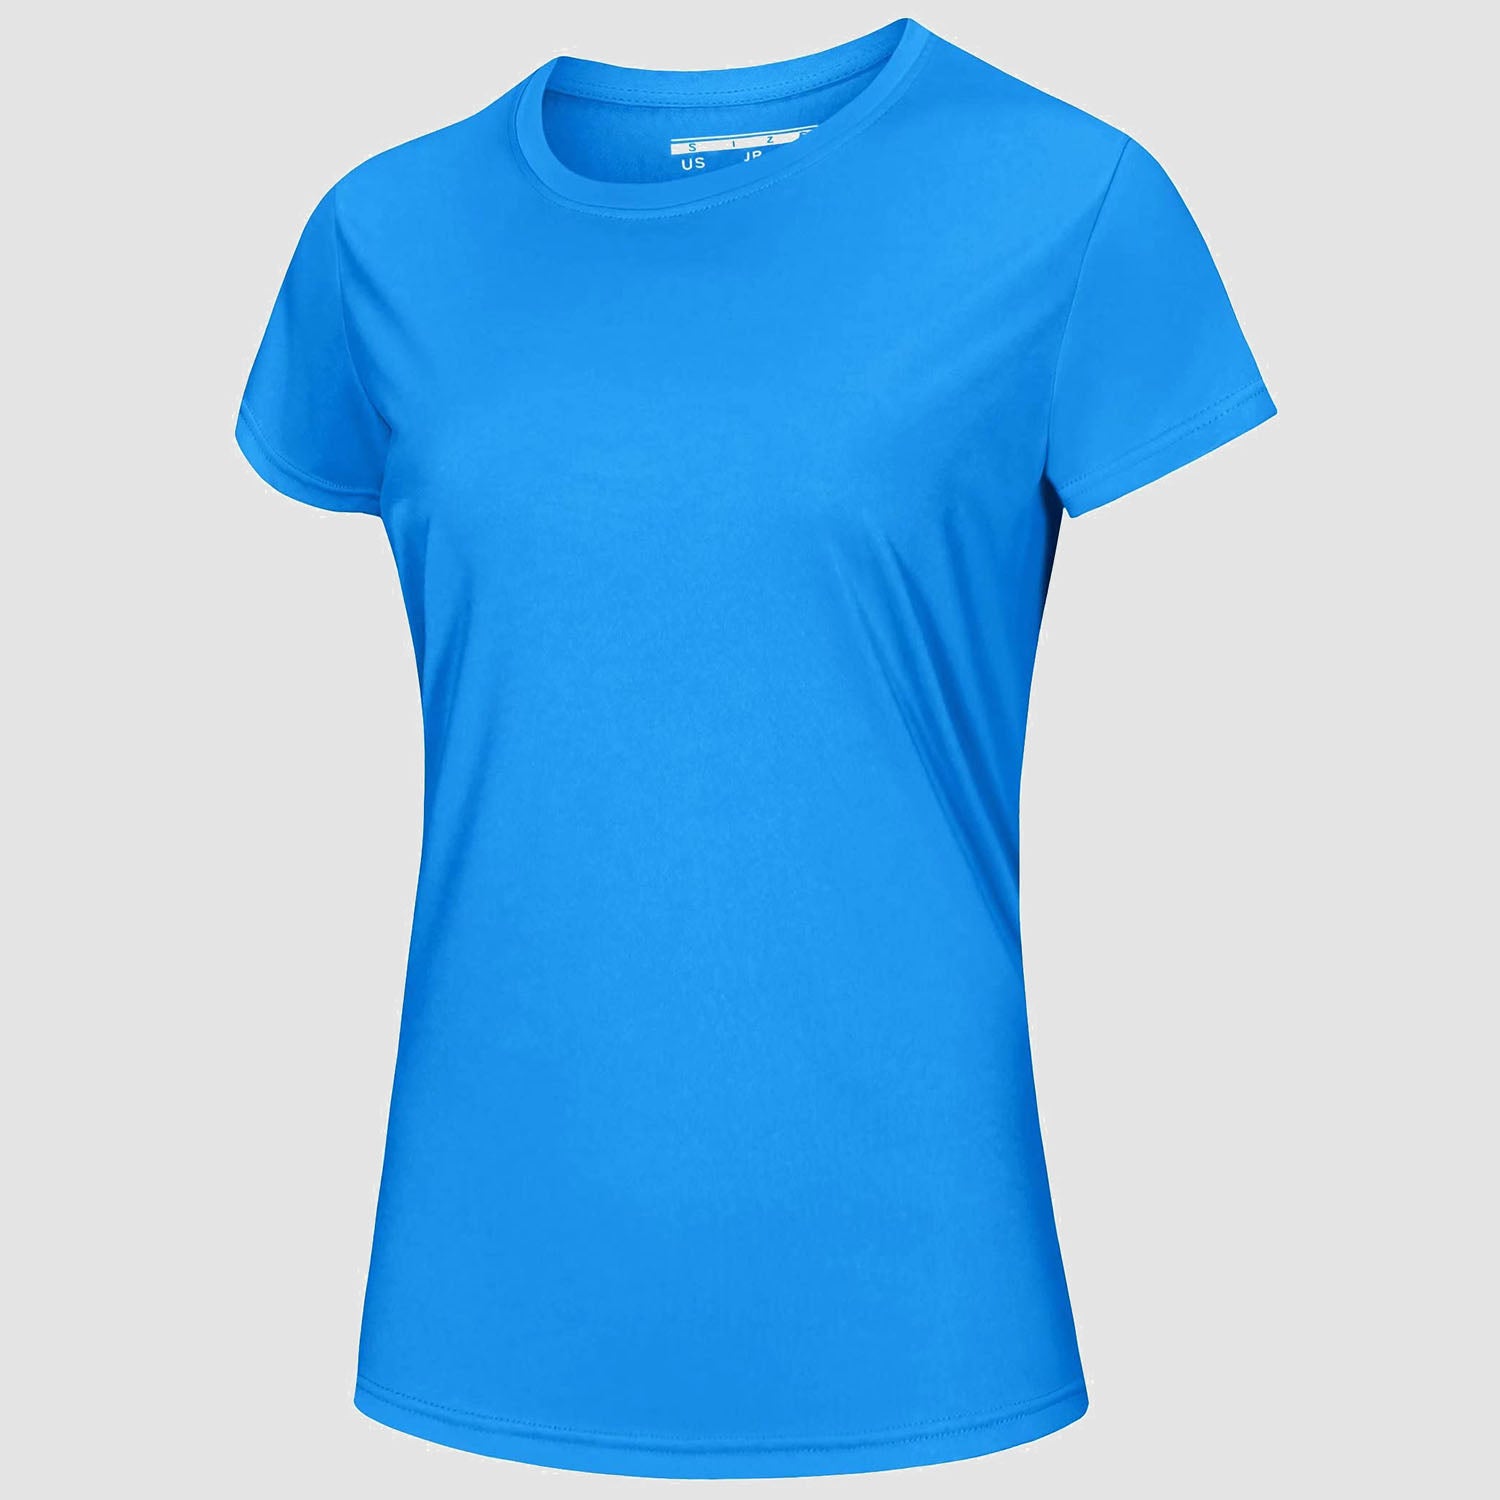 Women's  Casual T-Shirt Breathable UV Protection Outdoor Sports Quick Dry